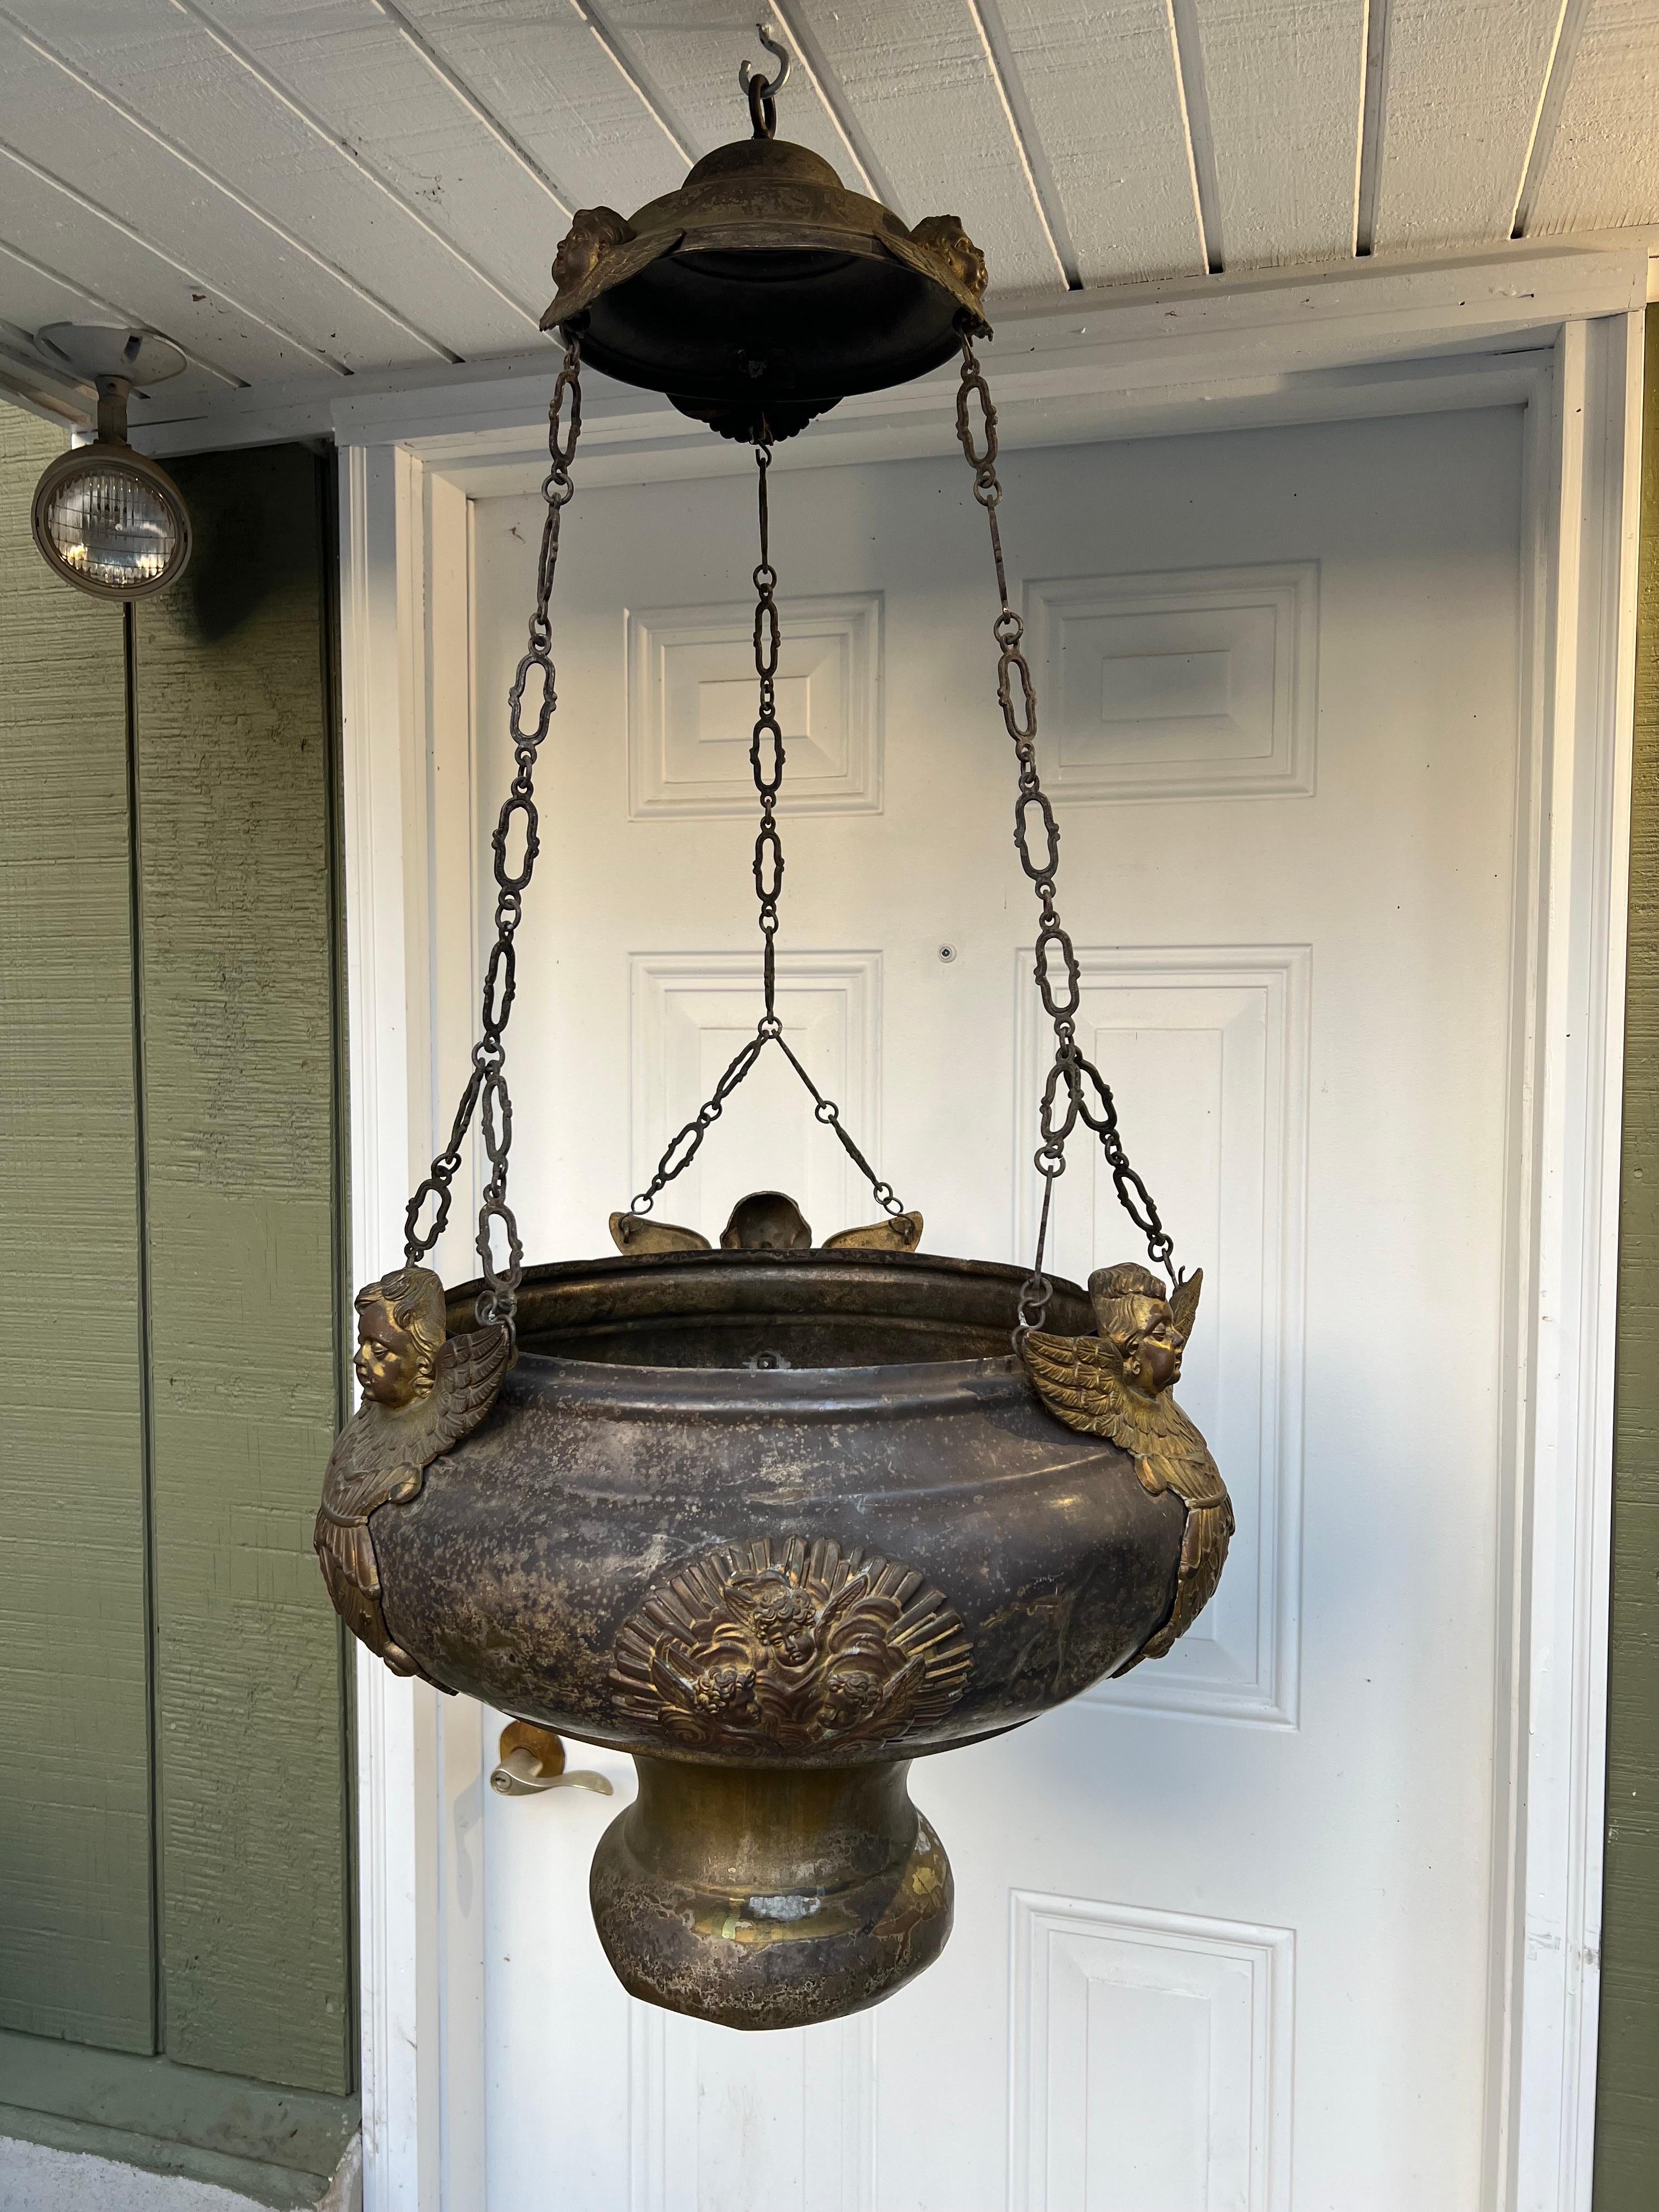 Antique Religious Thurible/Censor/Font/Planter or Chandelier. This was possibly a church thurible for burning incense in or a water font or baptismal font. Use as a planter to hang a fern in or turn into a ceiling fixture. Adorned with cherubs and